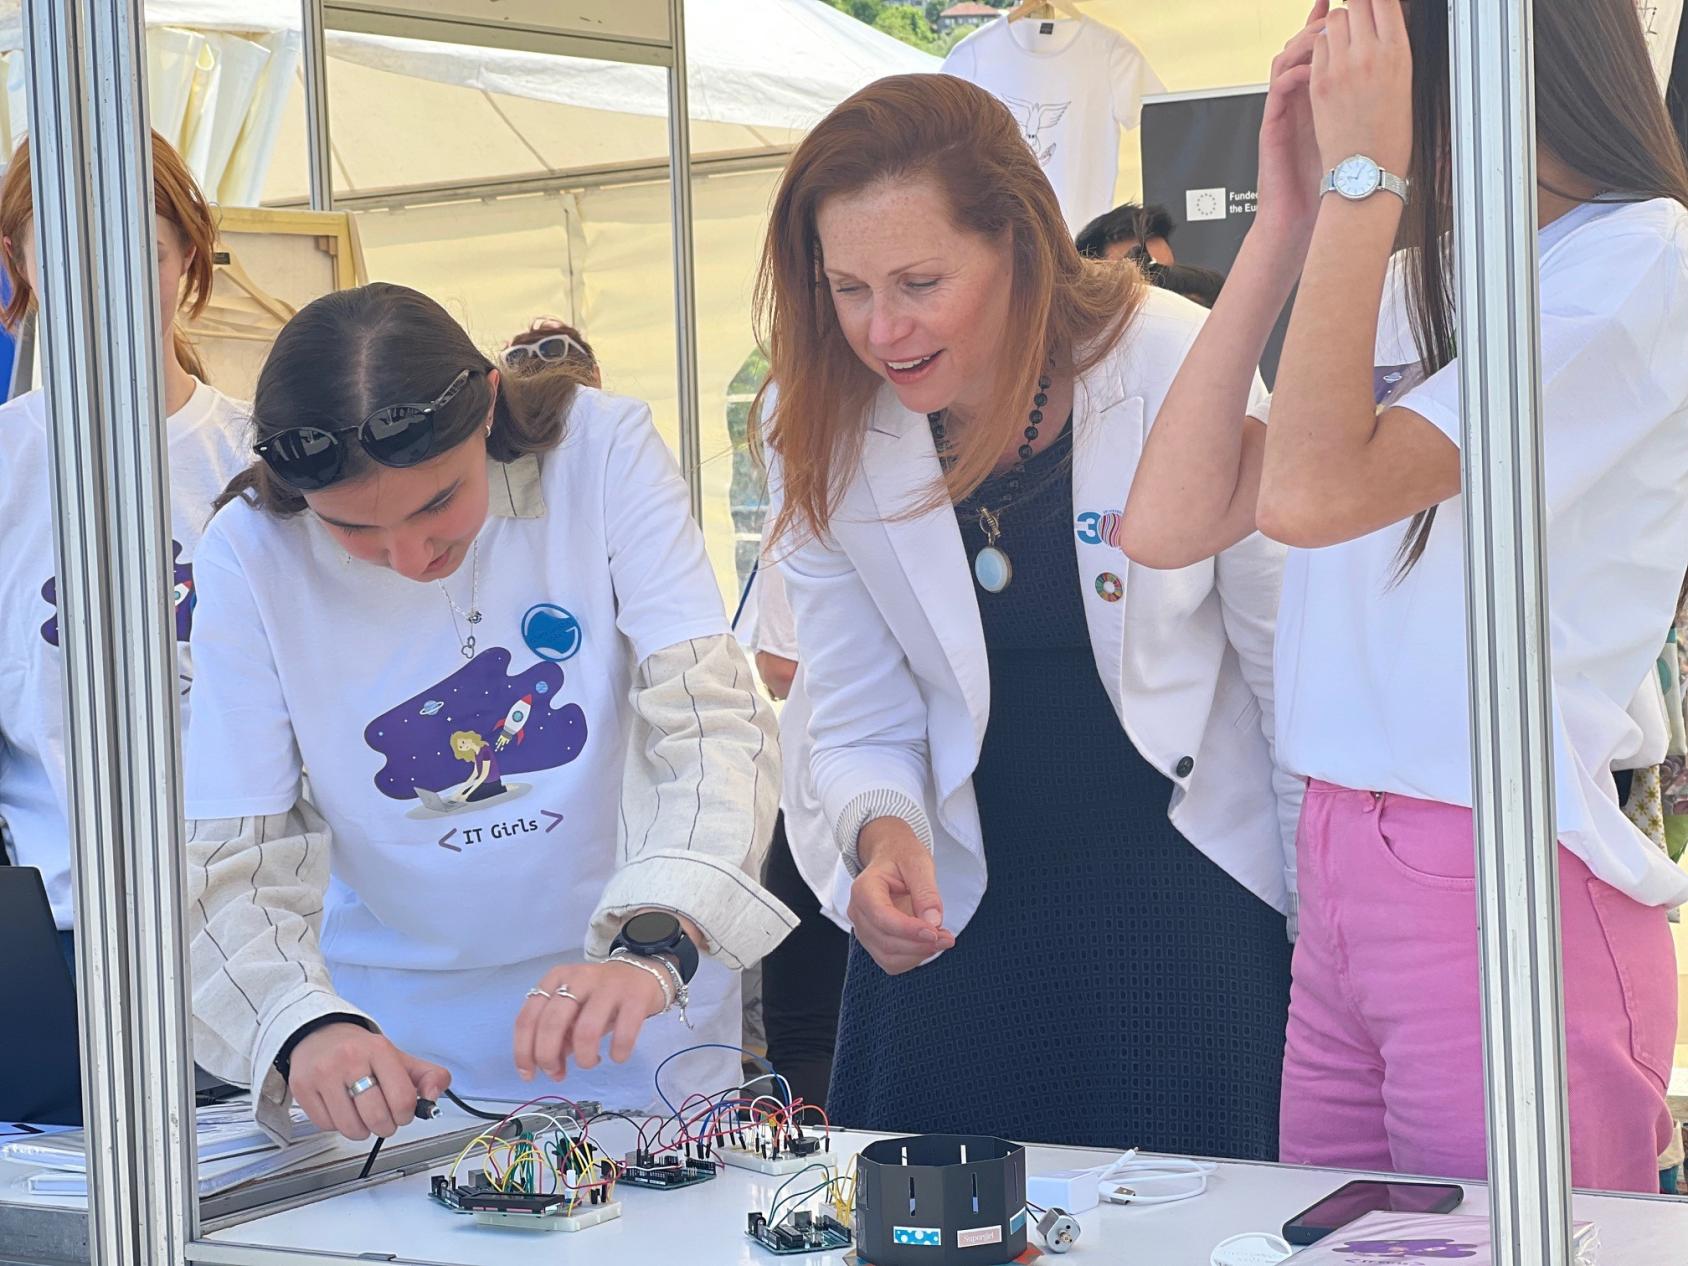 UN Resident Coordinator in Bosnia and Herzegovina, Ingrid Macdonald speaks to two girls participating in the IT Girls Initiative at the #ImagineChange Festival in Sarajevo